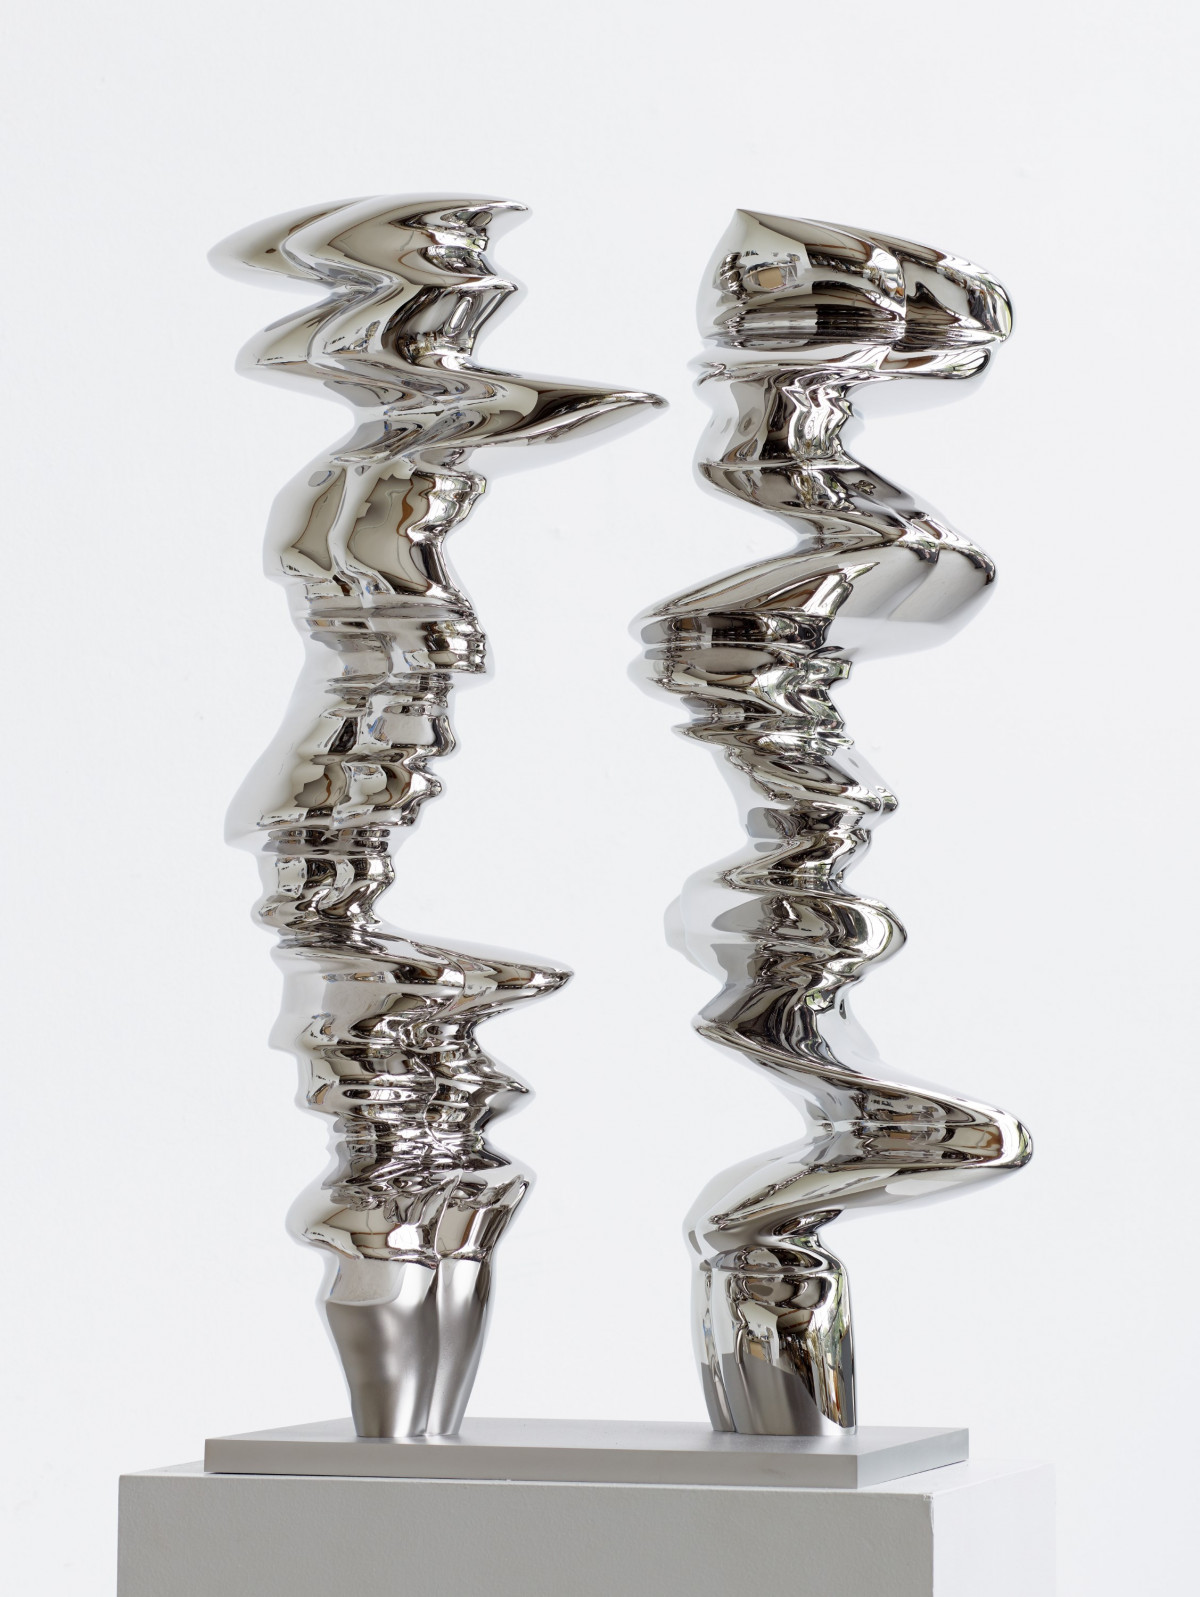 Tony Cragg, ‘Near Relatives’, 2022, Stainless steel